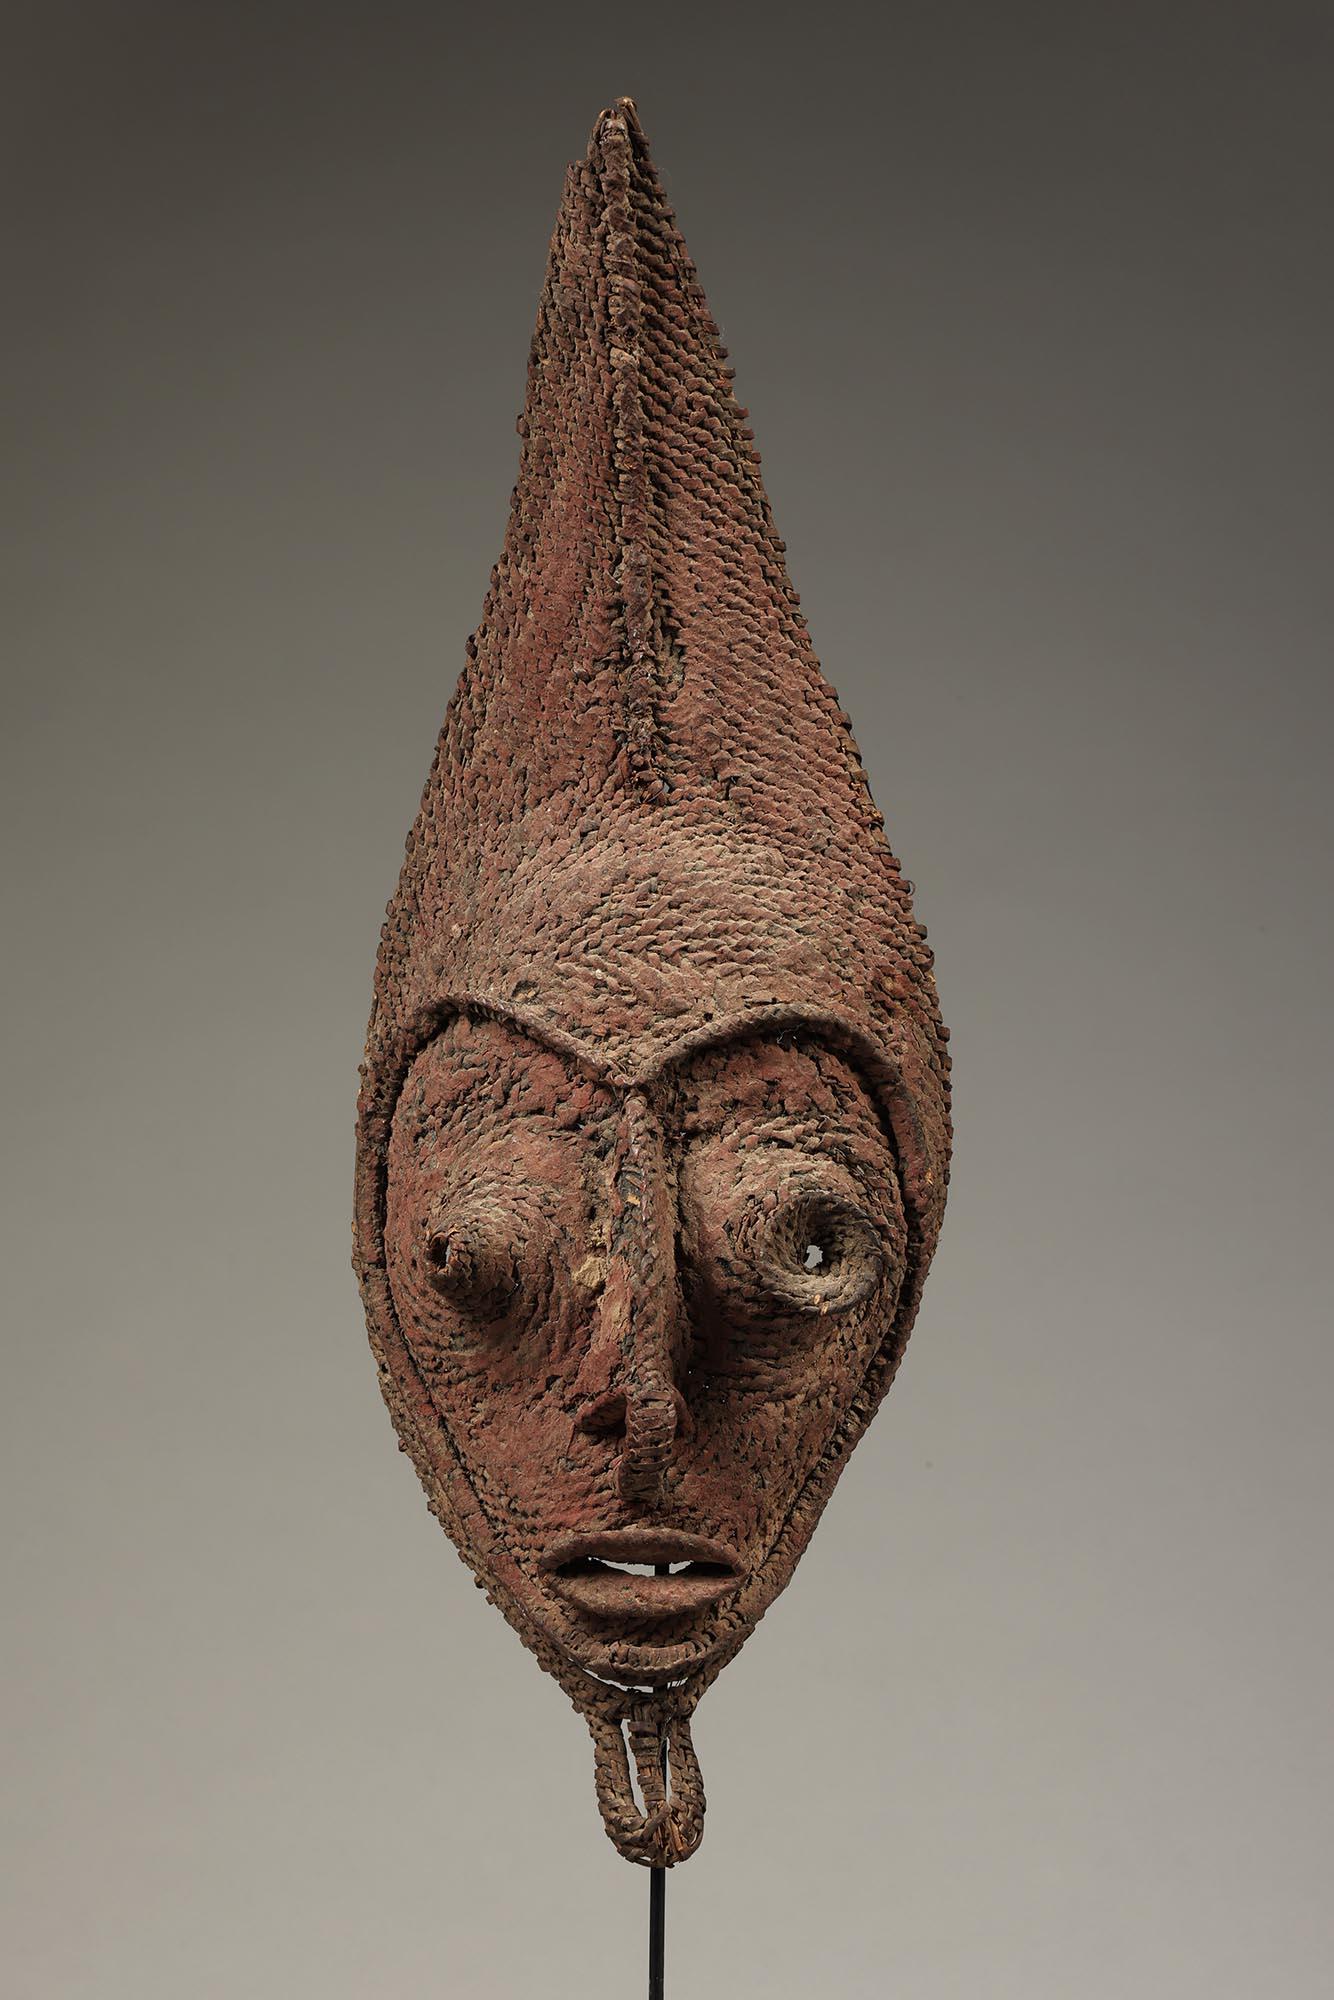 Early Papua New Guinea Sepik tightly woven raffia mask from a talipun bride price currency piece.  Old very encrusted surface.
Areas of red and other pigments. Wonderful heart shaped face with open eyes and mouth. One eye with projecting disc.
This